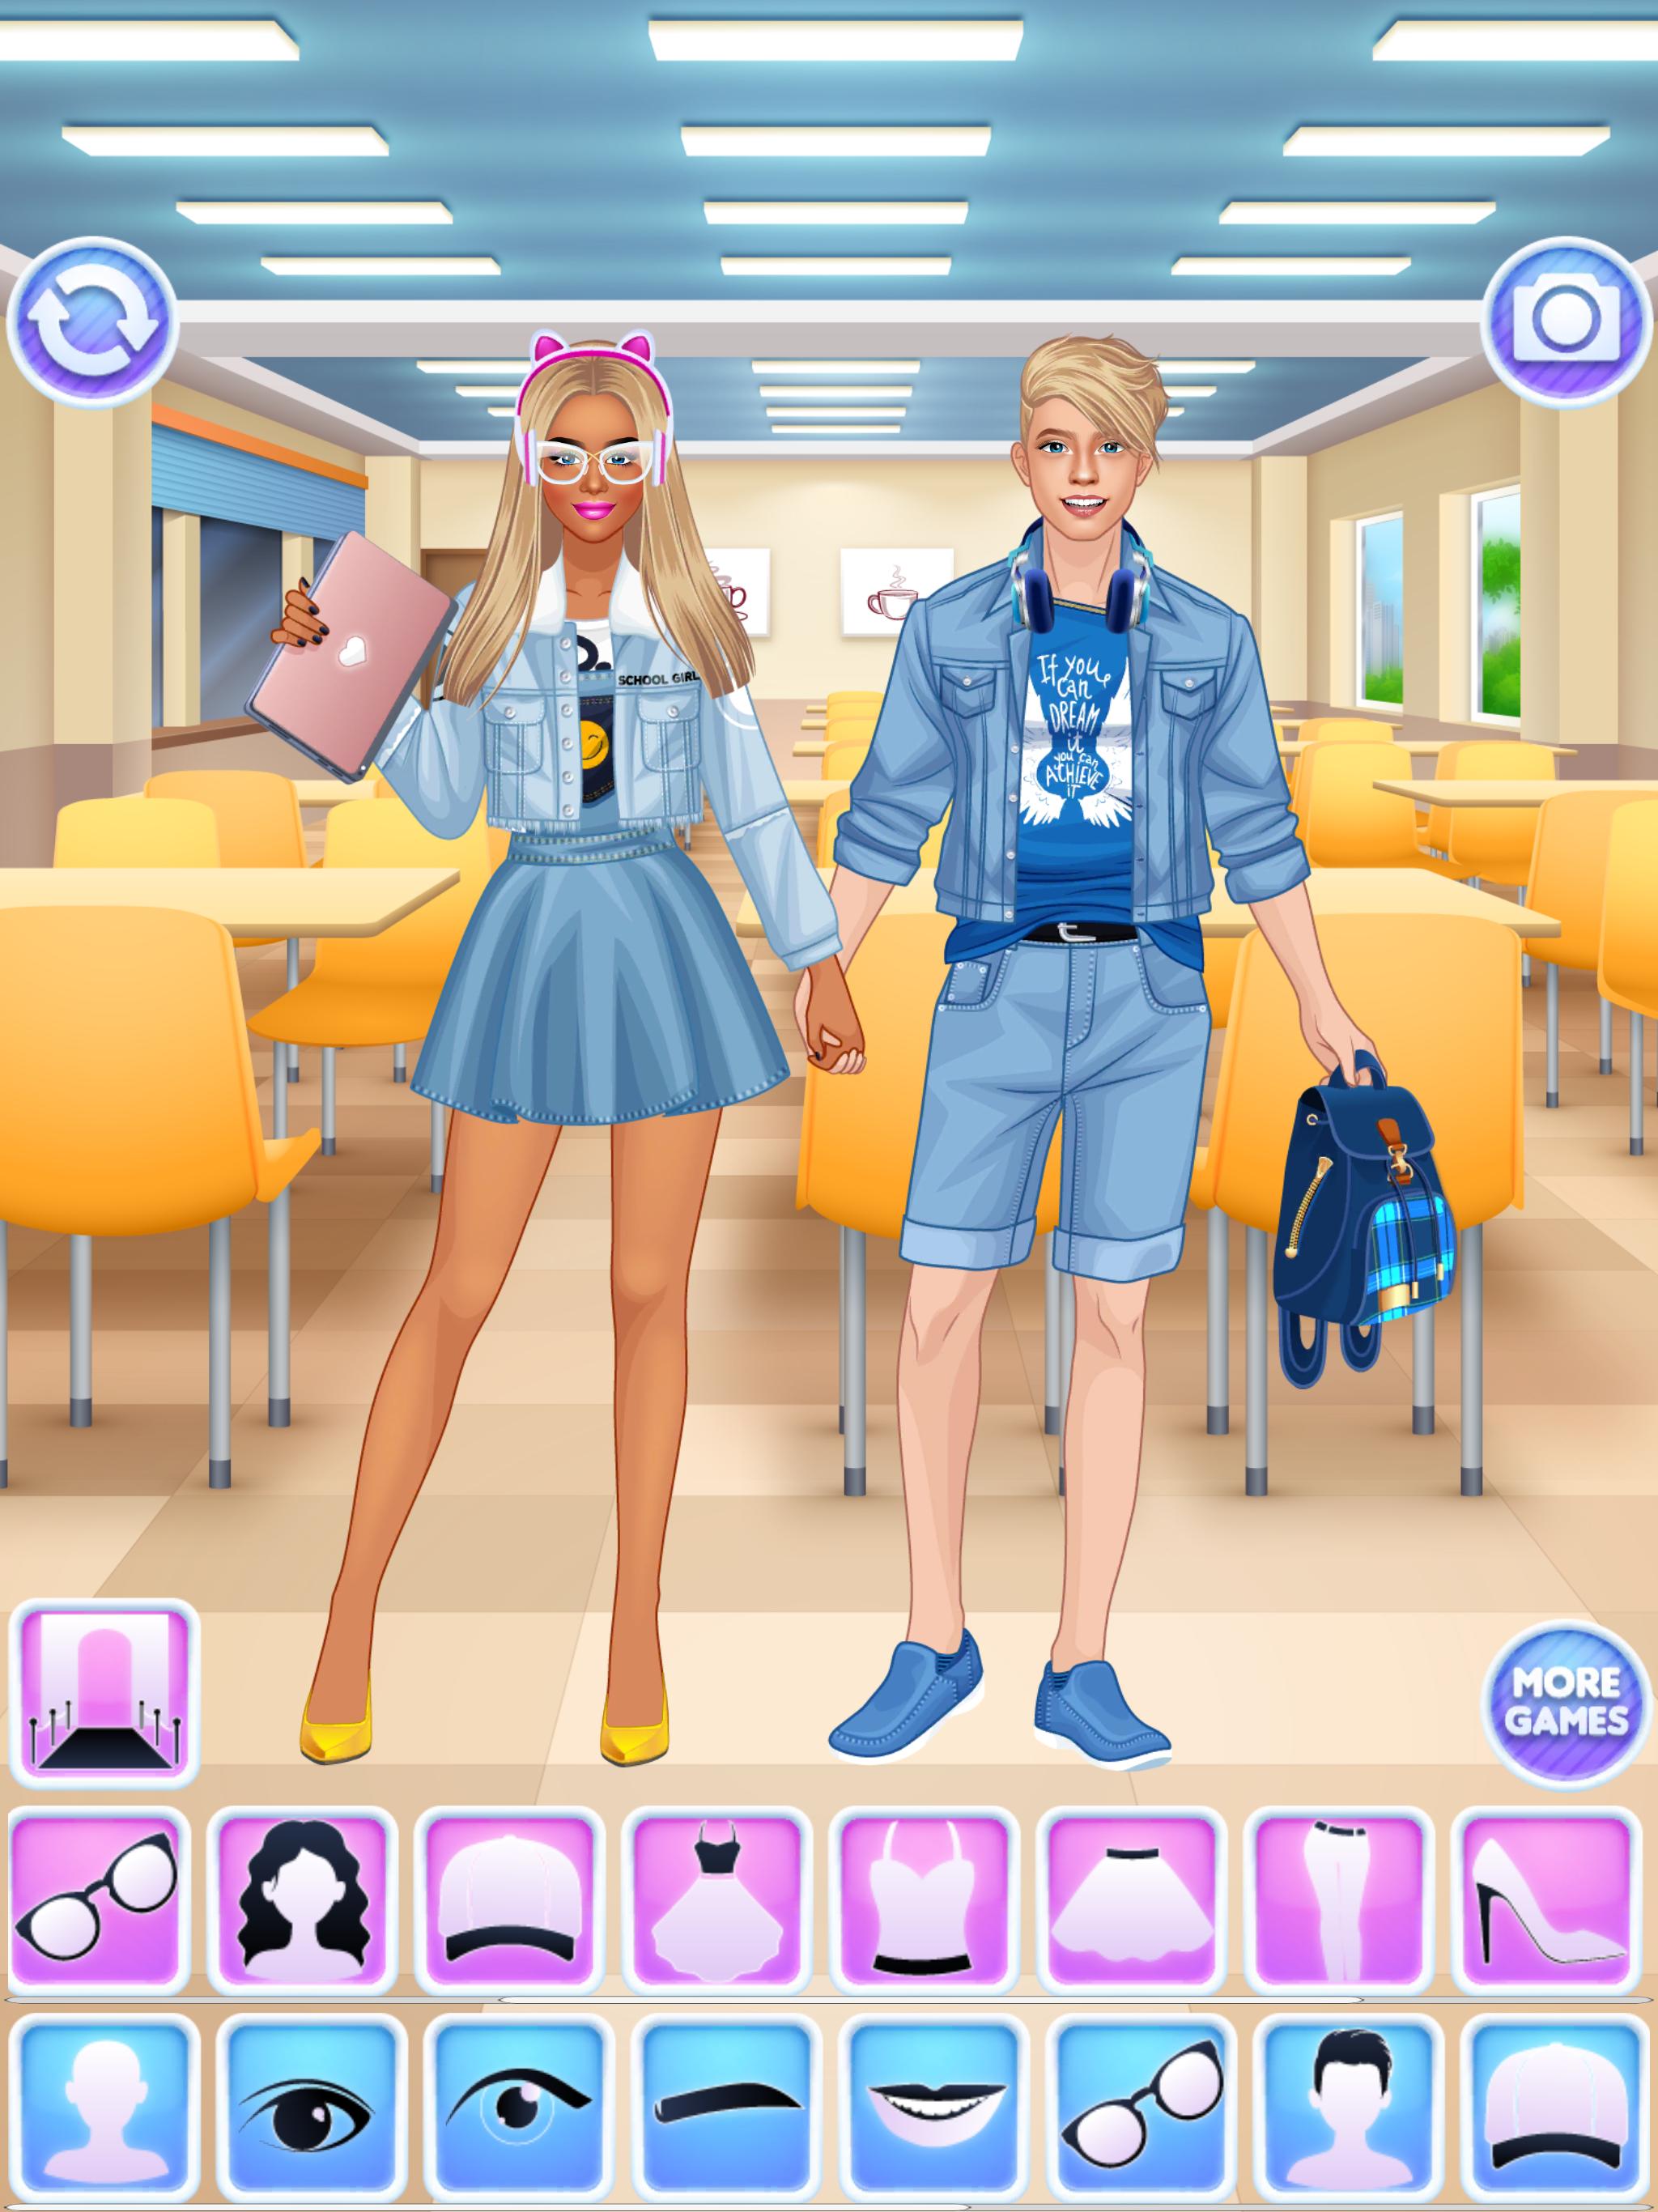 High School Couple for Android - APK Download